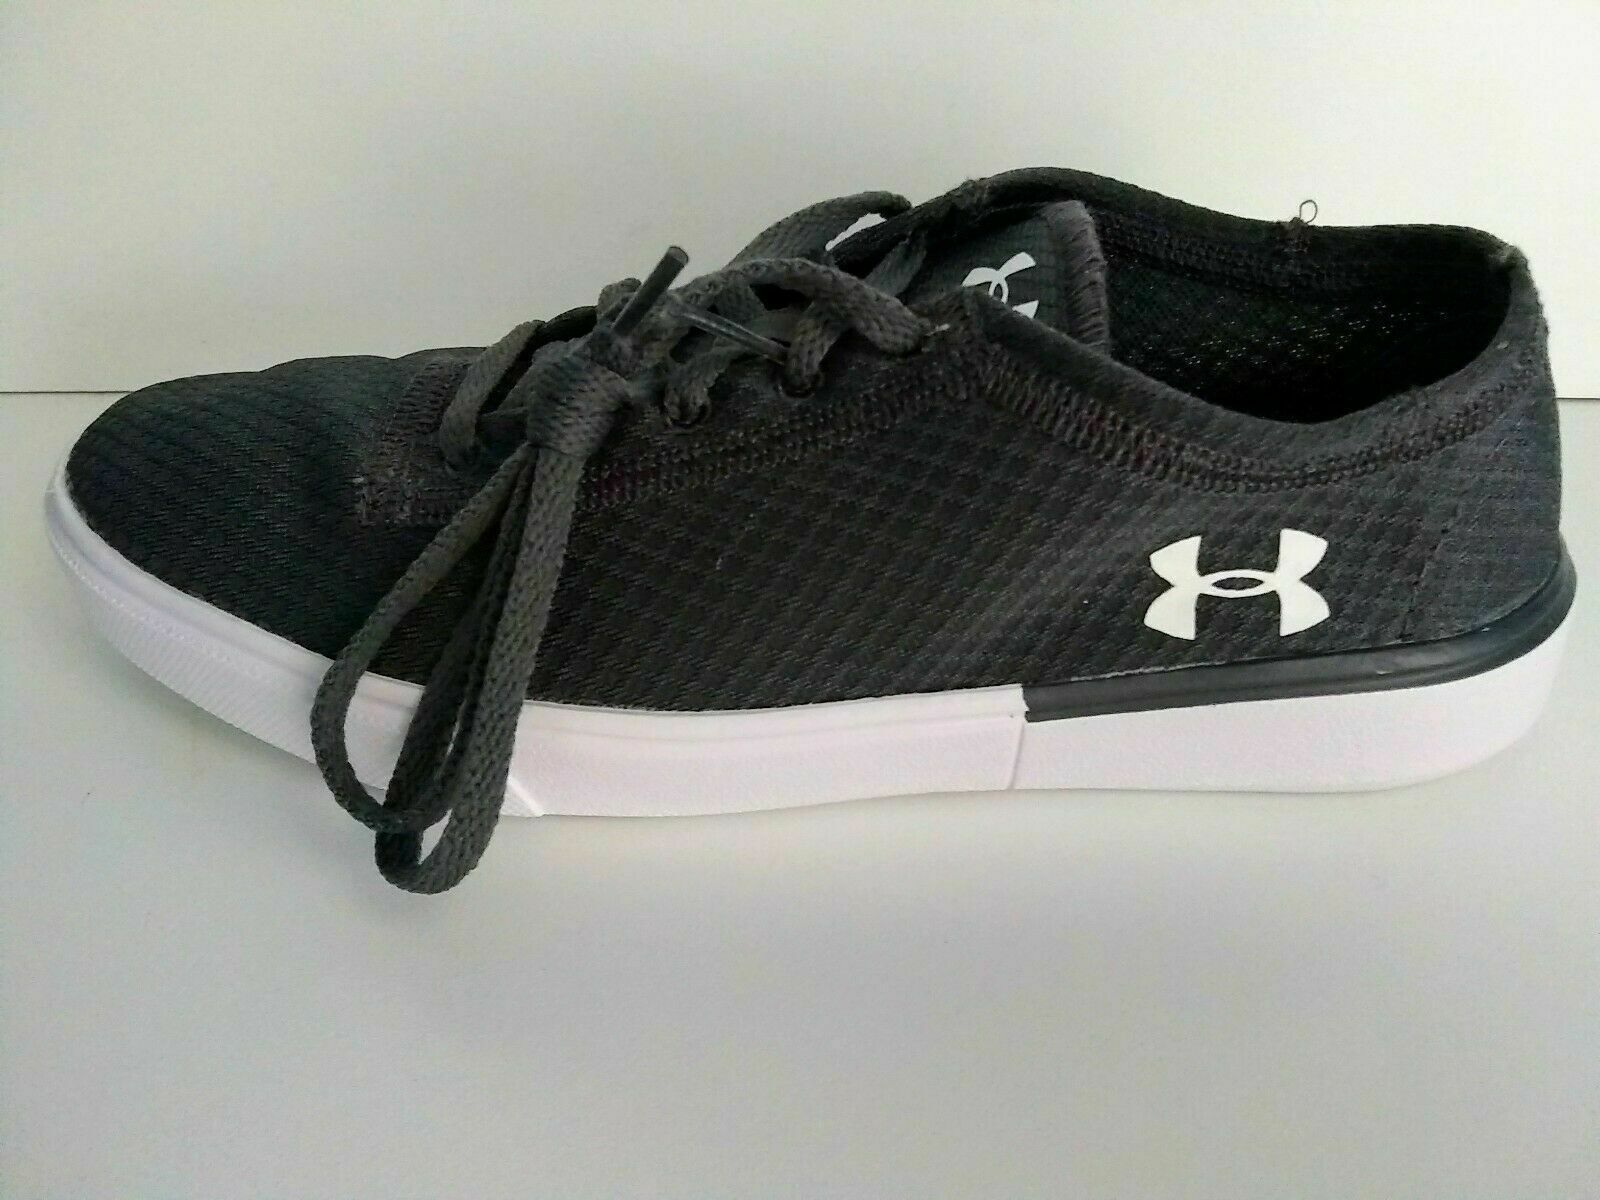 Under Armor Youth Size 4 Dark Gray Shoe - Left Shoe ONLY! - New, No Box - $9.95